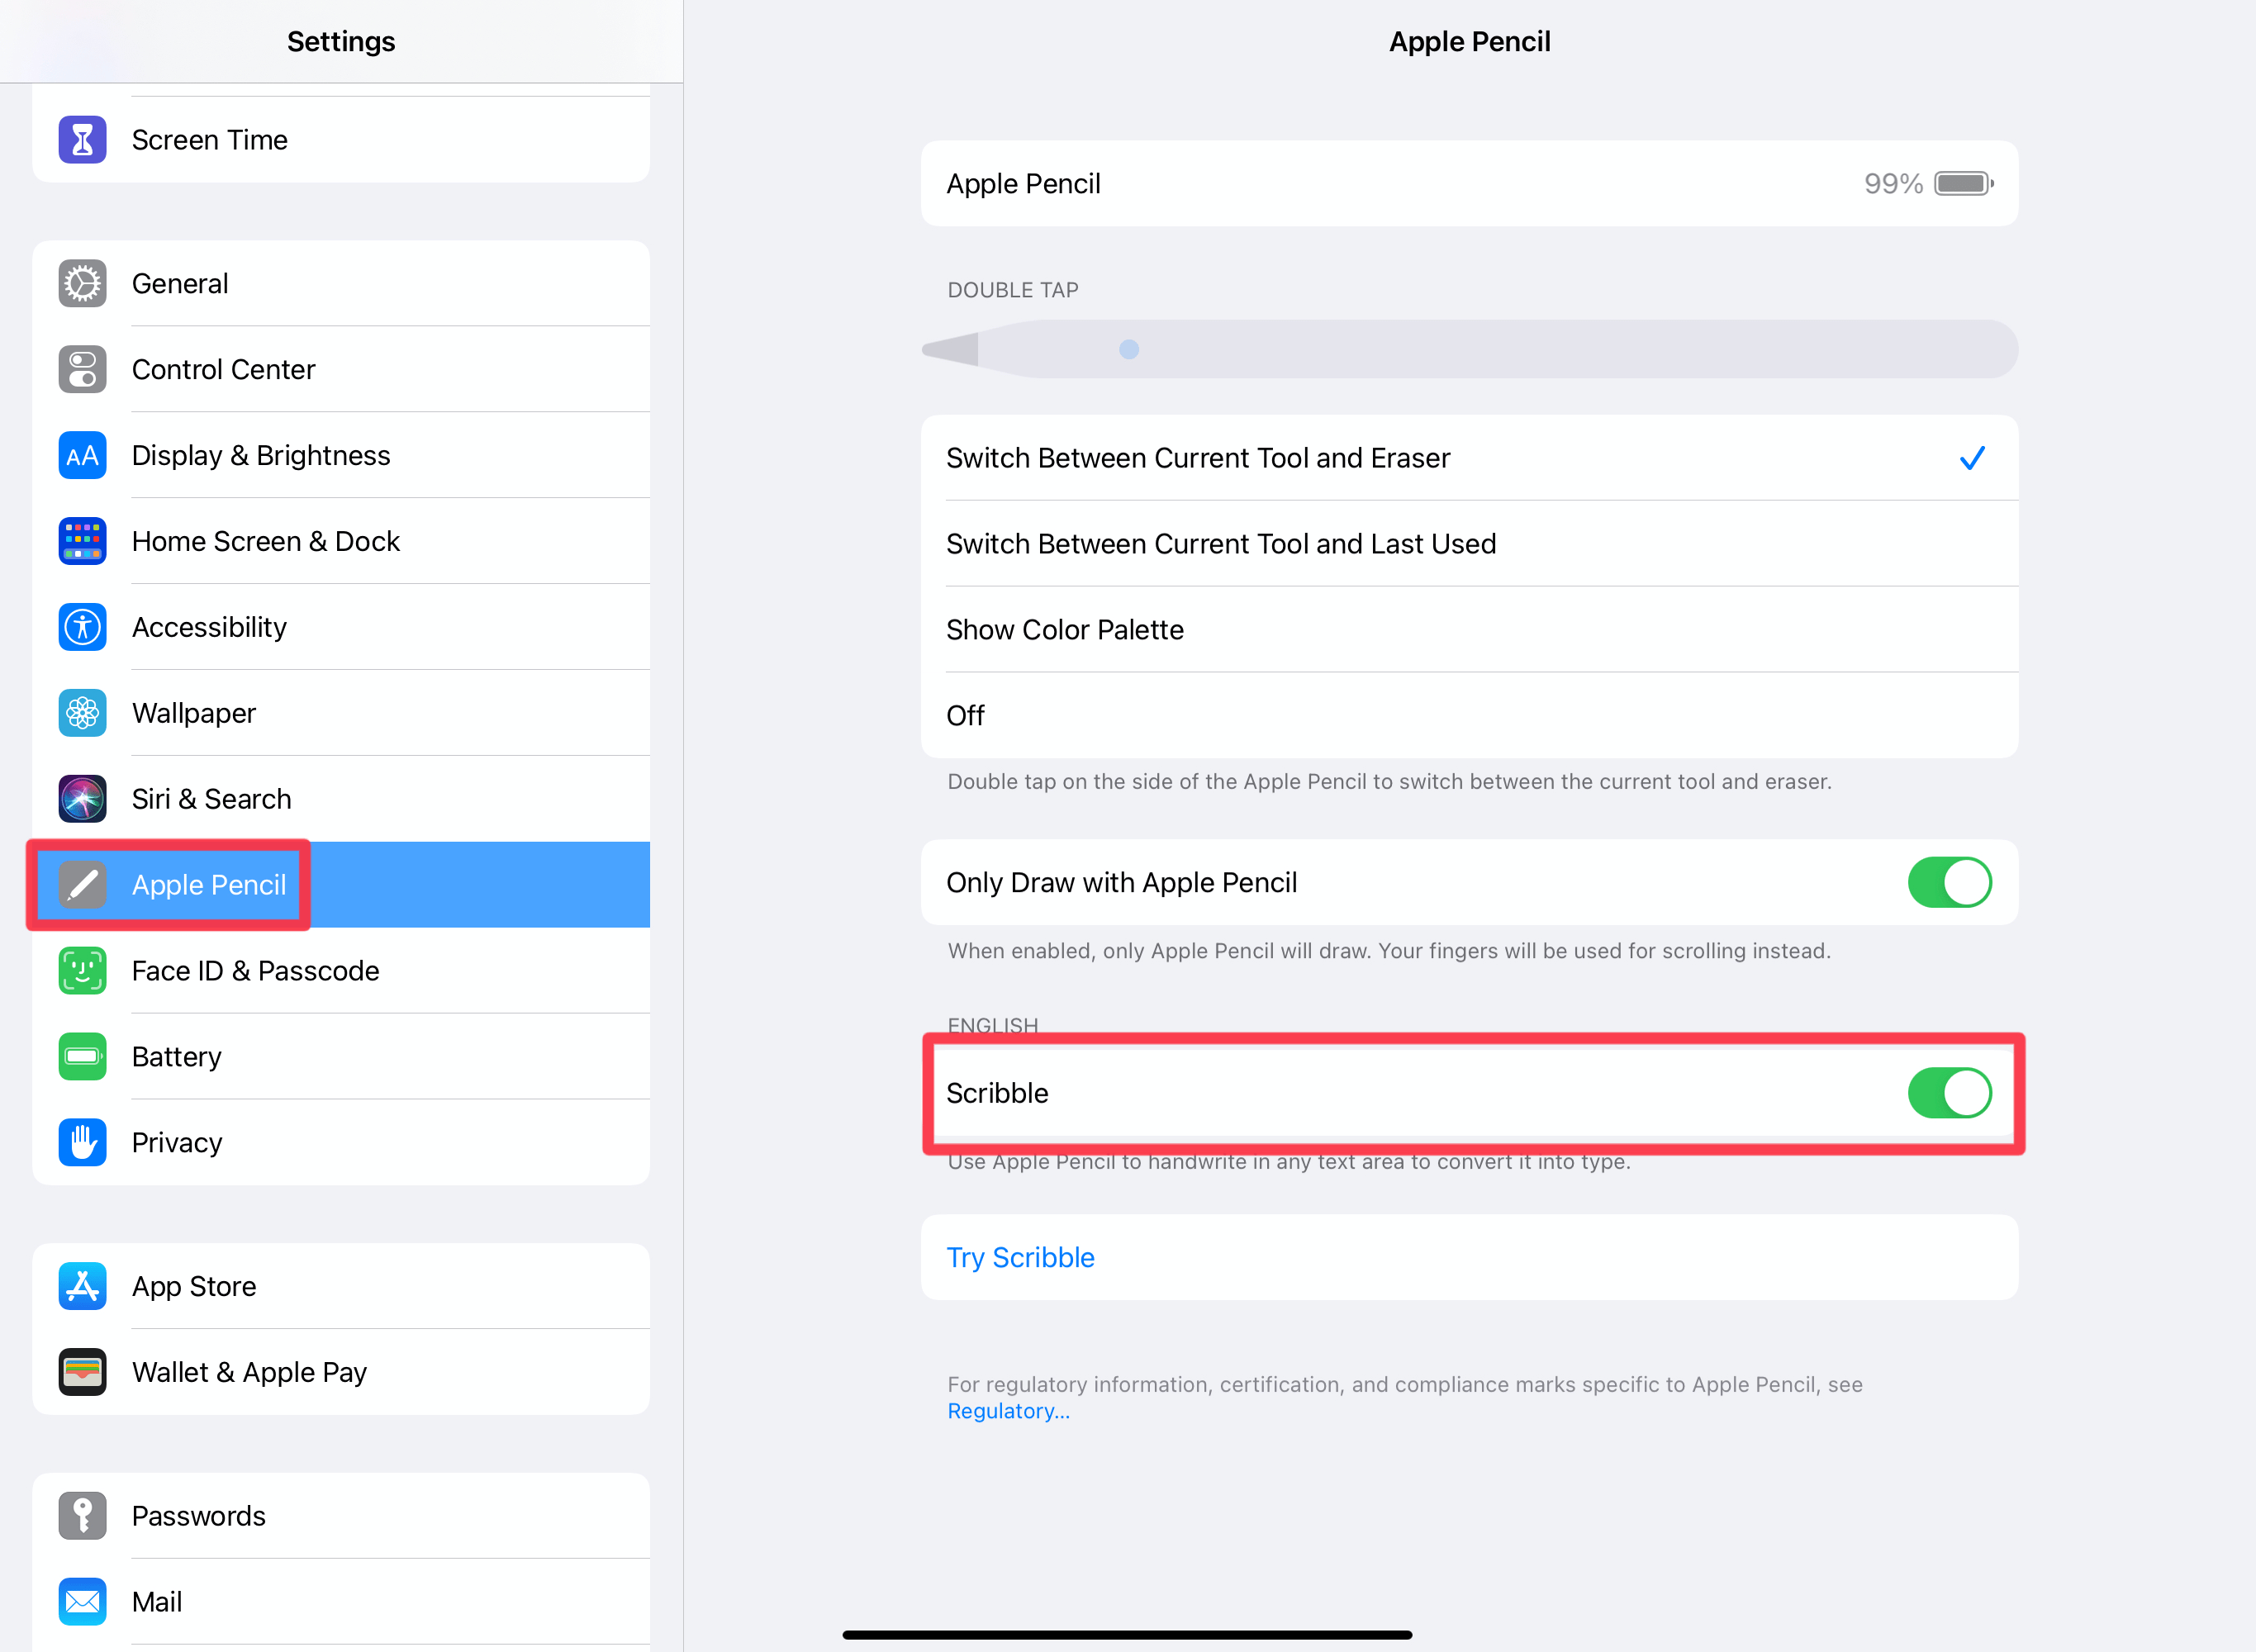 Enable scribble support from Settings